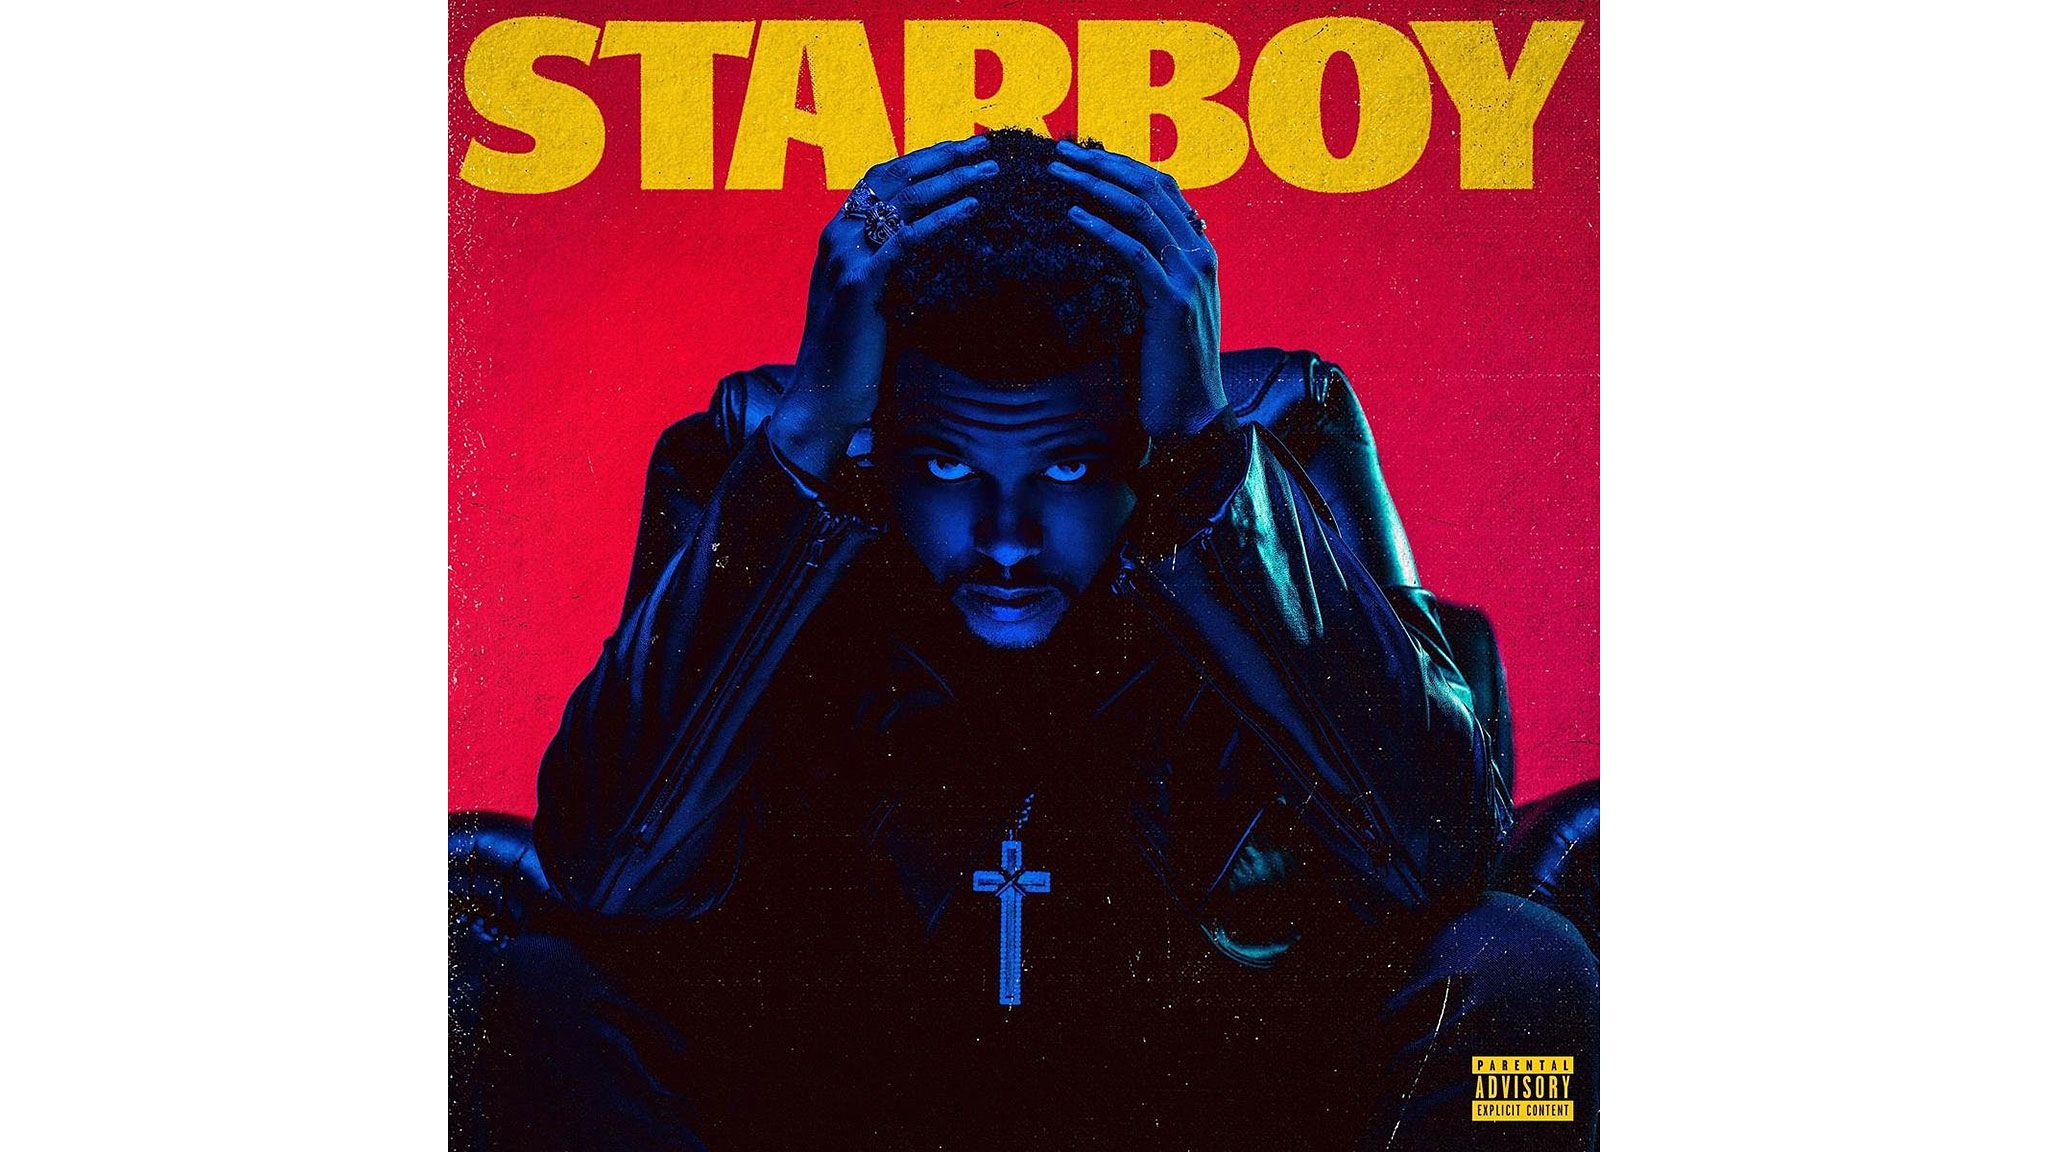 Starboy by the Weeknd HD Wallpaper IOS Digital Download  Etsy